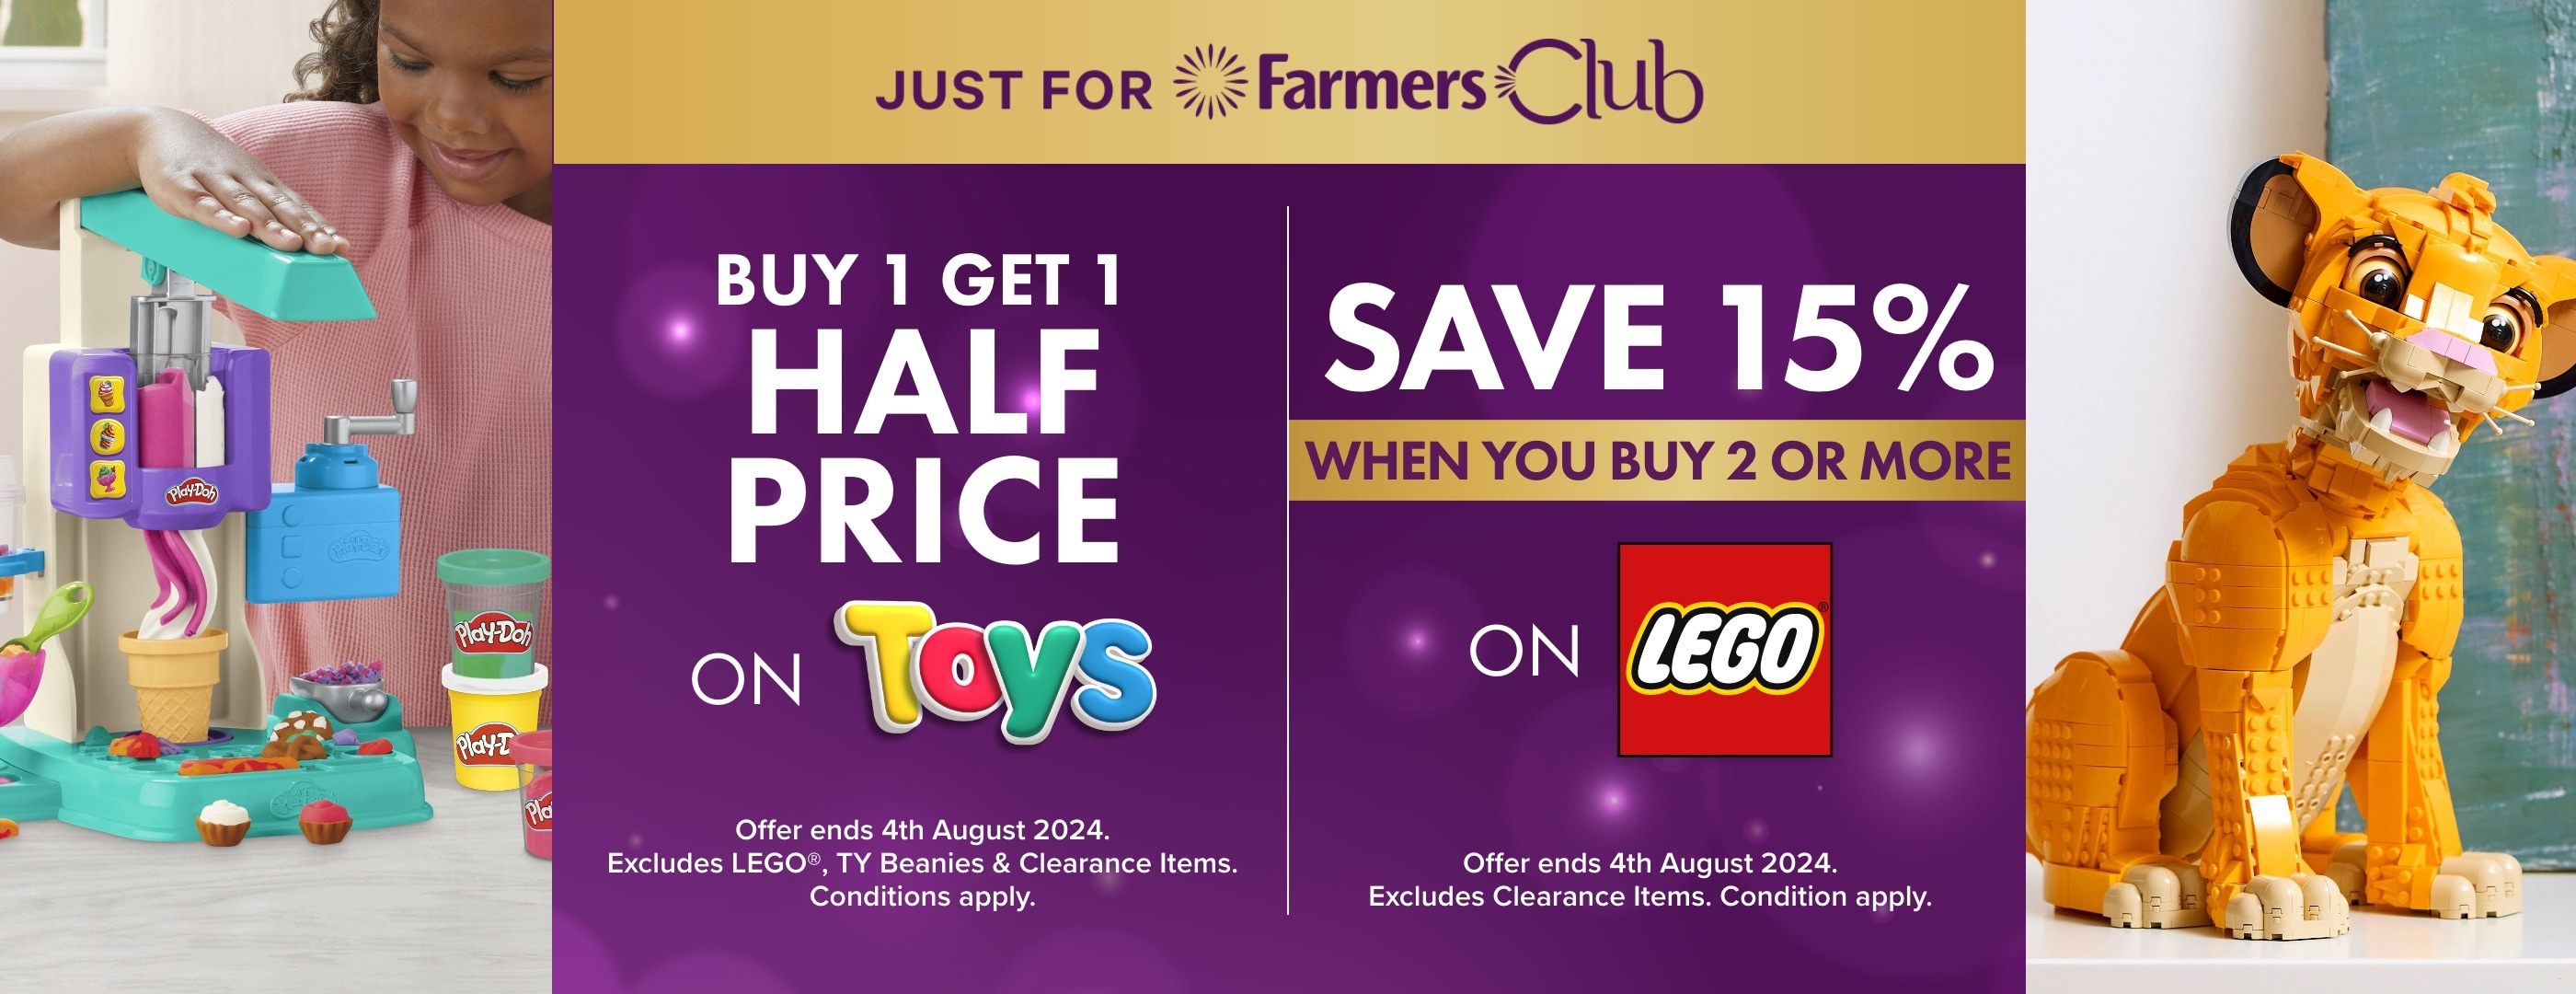 BUY 1 GET 1 HALF PRICE on Toys| Save 15% when you buy any 2 or more items by LEGO®